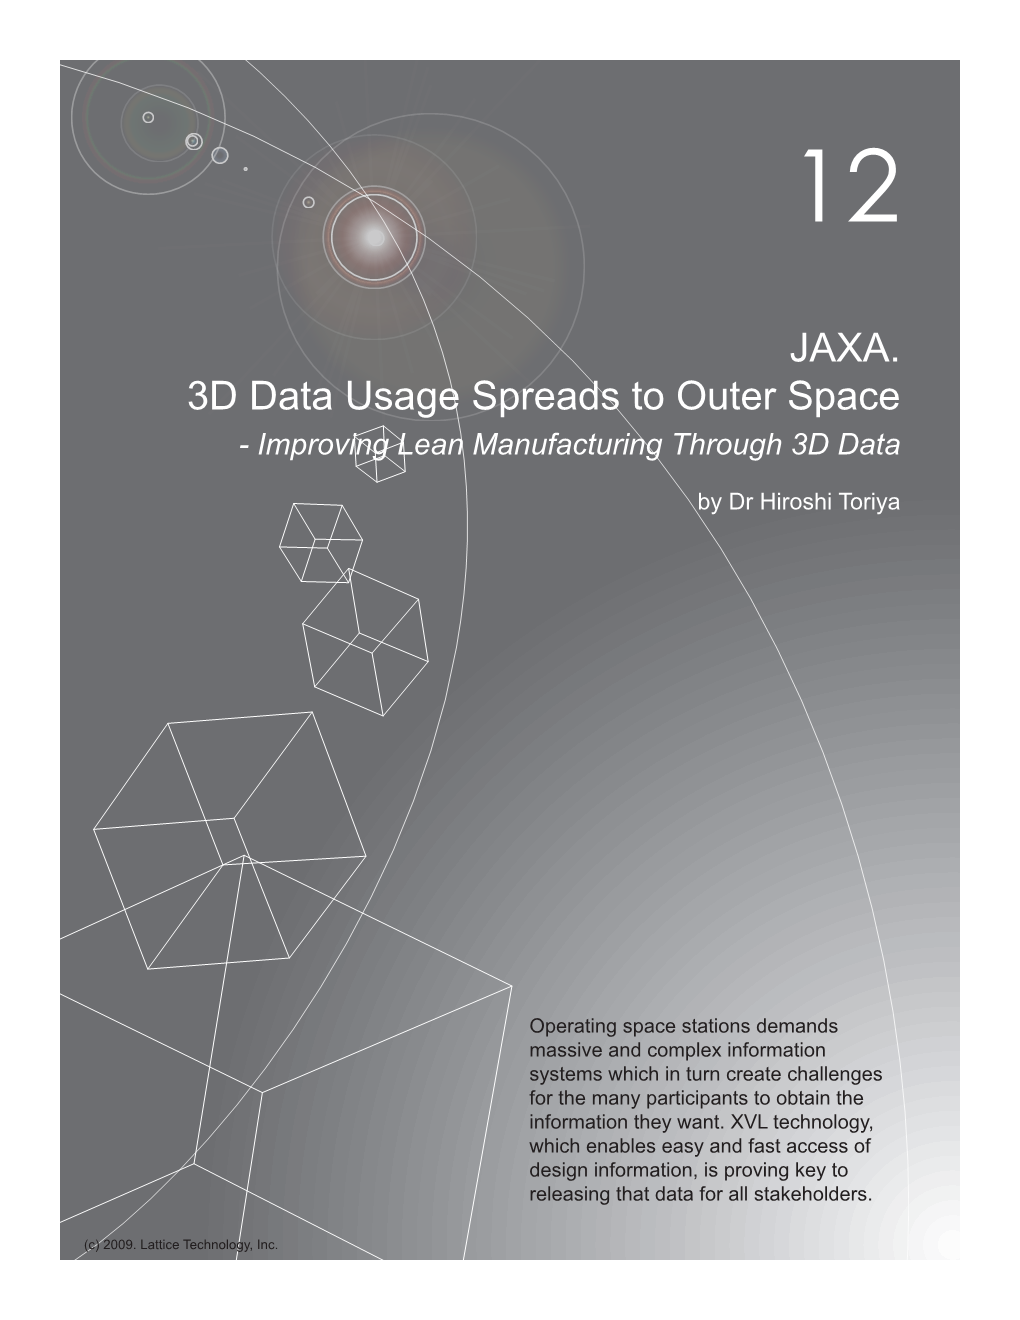 JAXA. 3D Data Usage Spreads to Outer Space - Improving Lean Manufacturing Through 3D Data